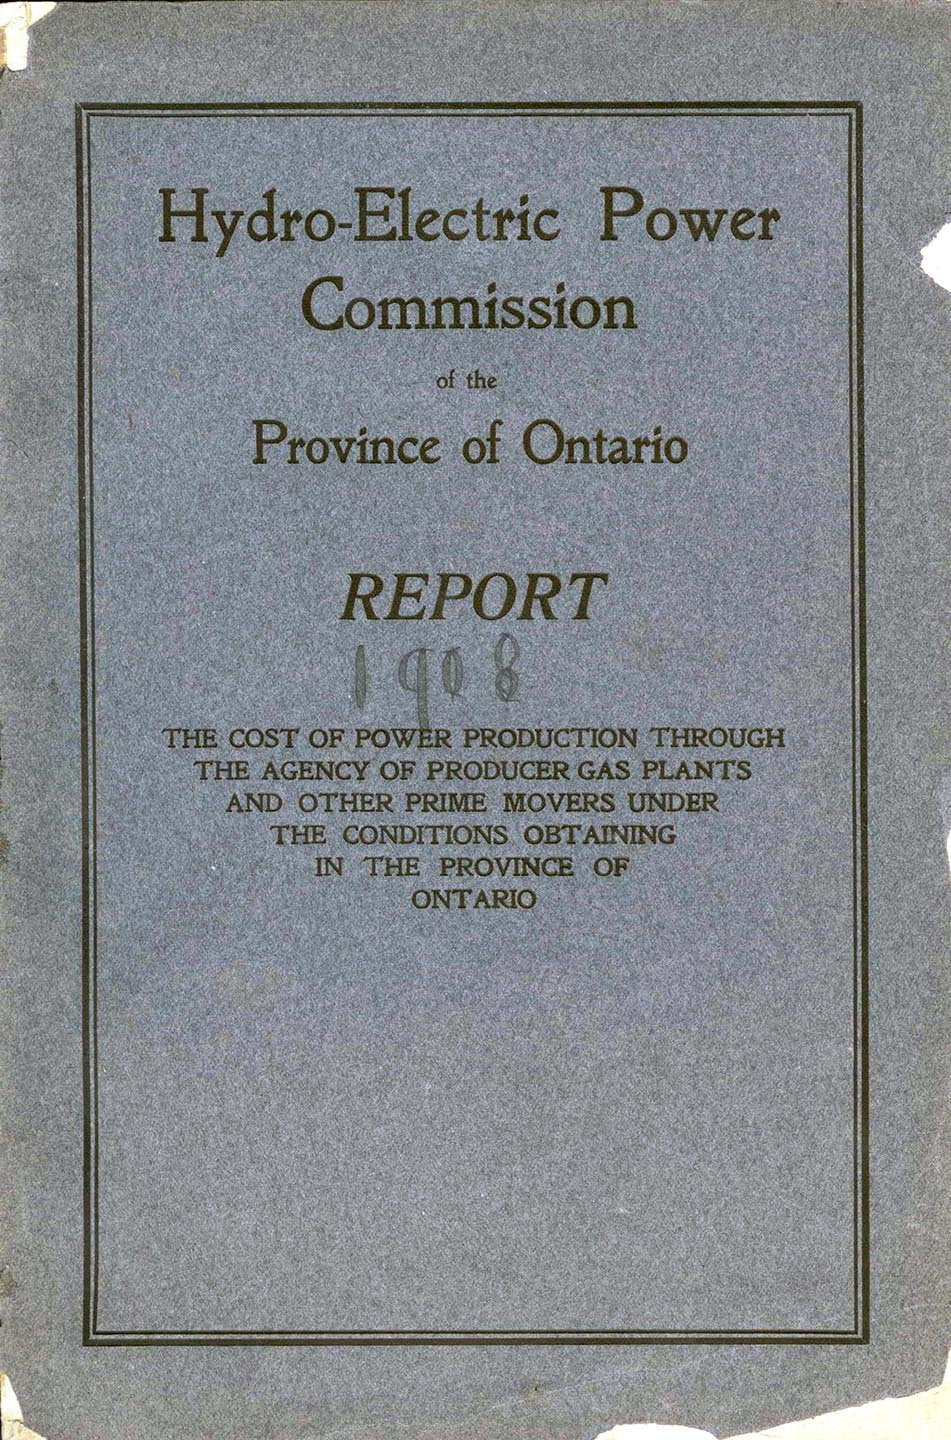 Hydro-Electric Power Commission of the Province of Ontario Report 1908